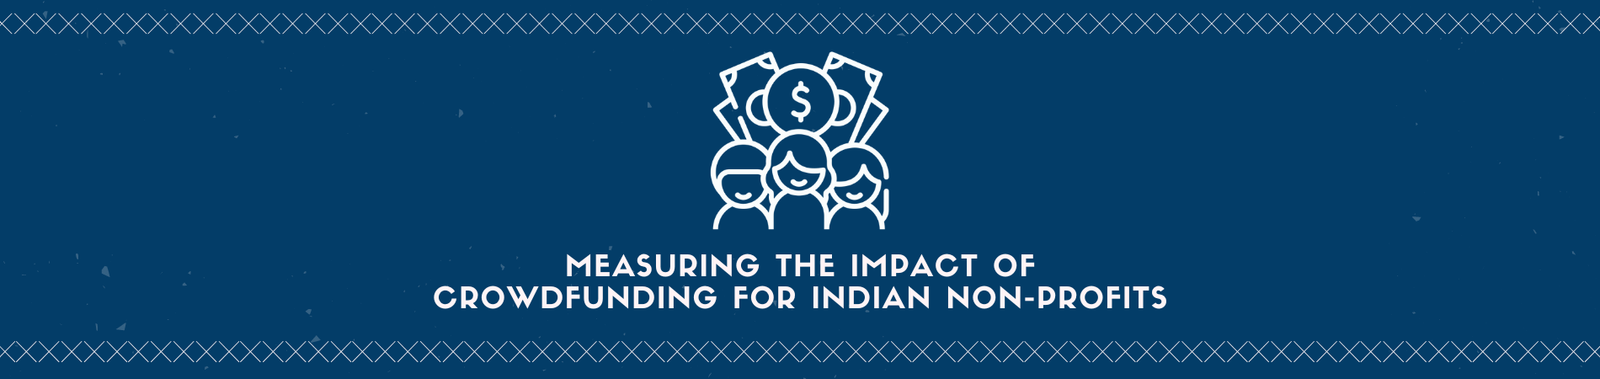 Measuring the Impact of Crowdfunding for Indian Non-Profits